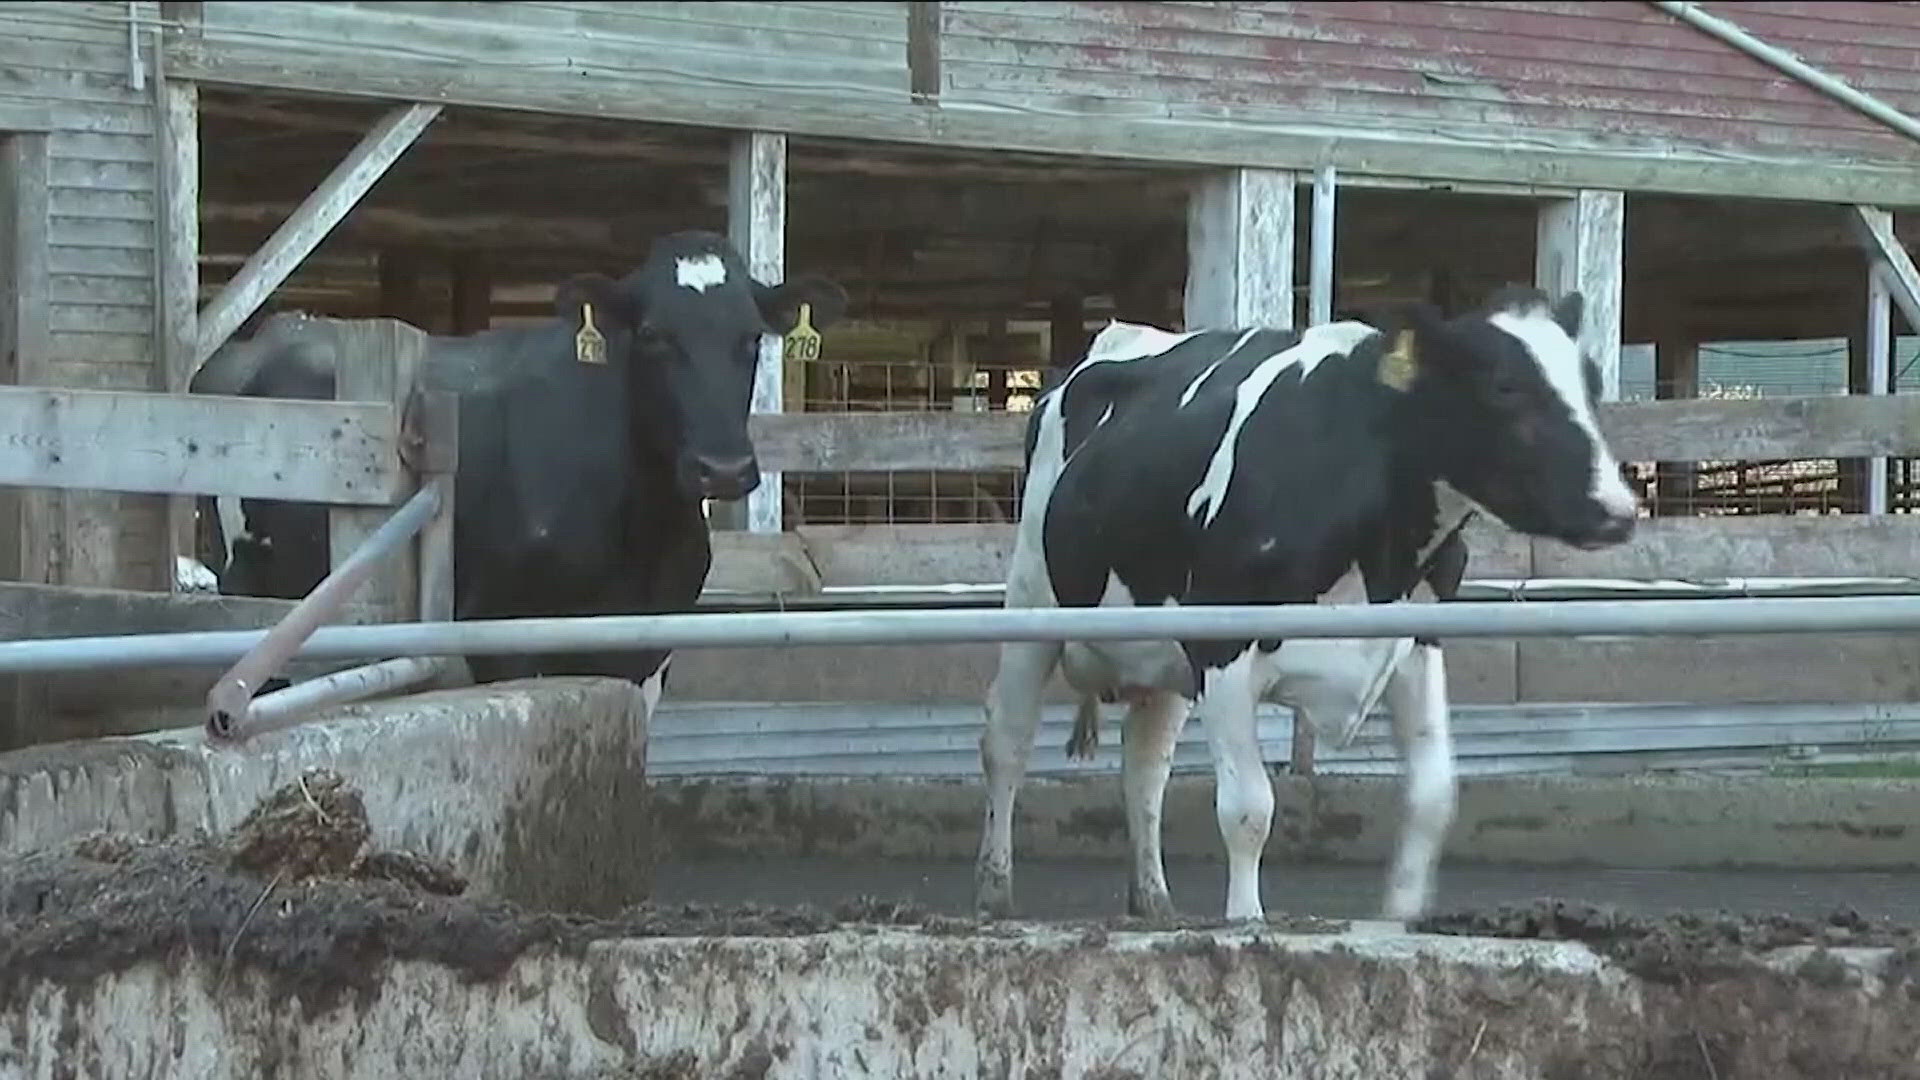 A large outbreak of bird flu in dairy cattle has some consumers worried about the safety of the milk they drink.